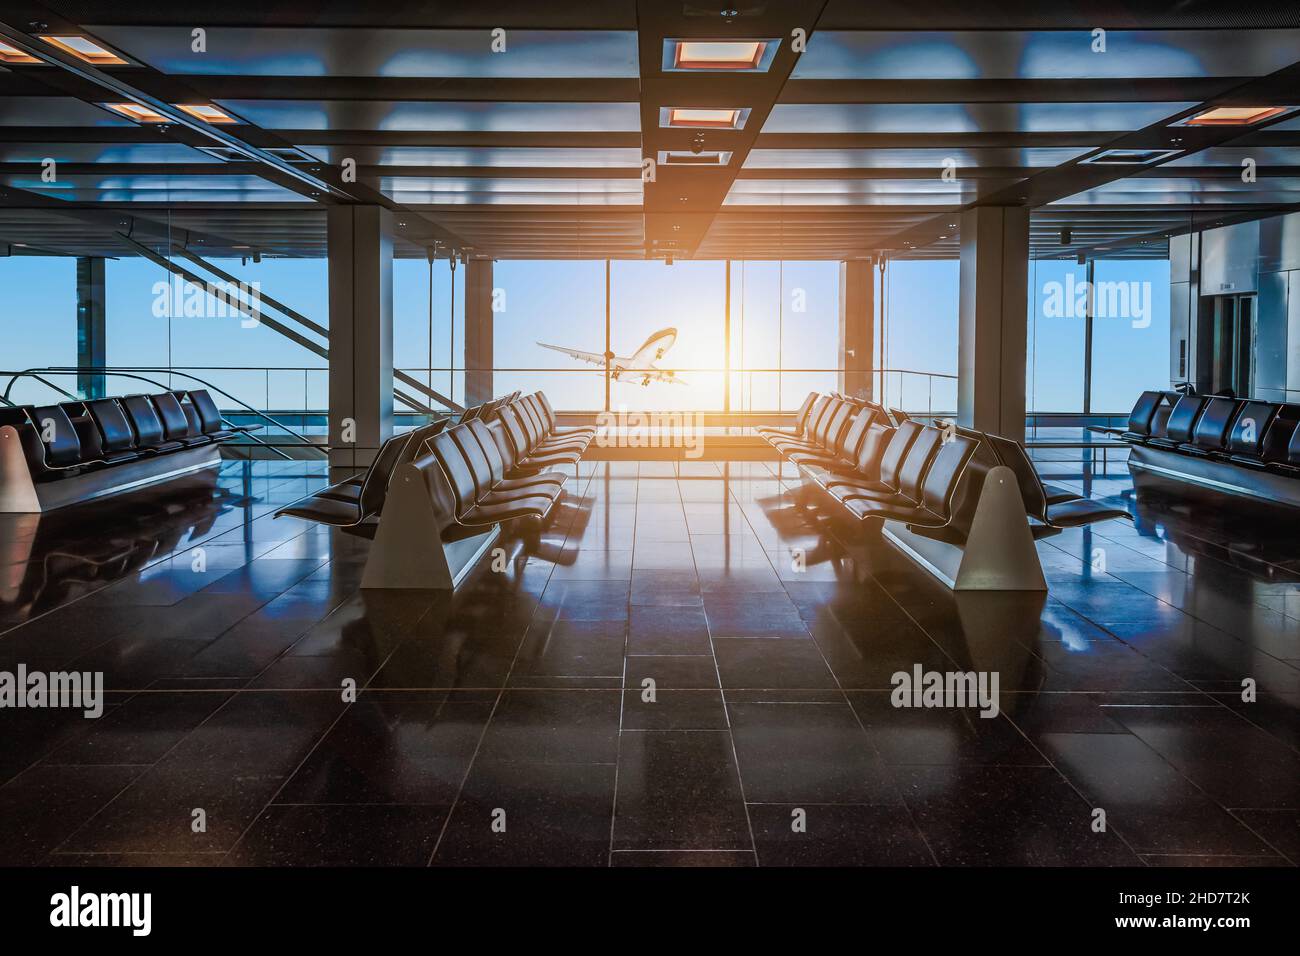 Airport departure hall with empty waiting seats. Stock Photo